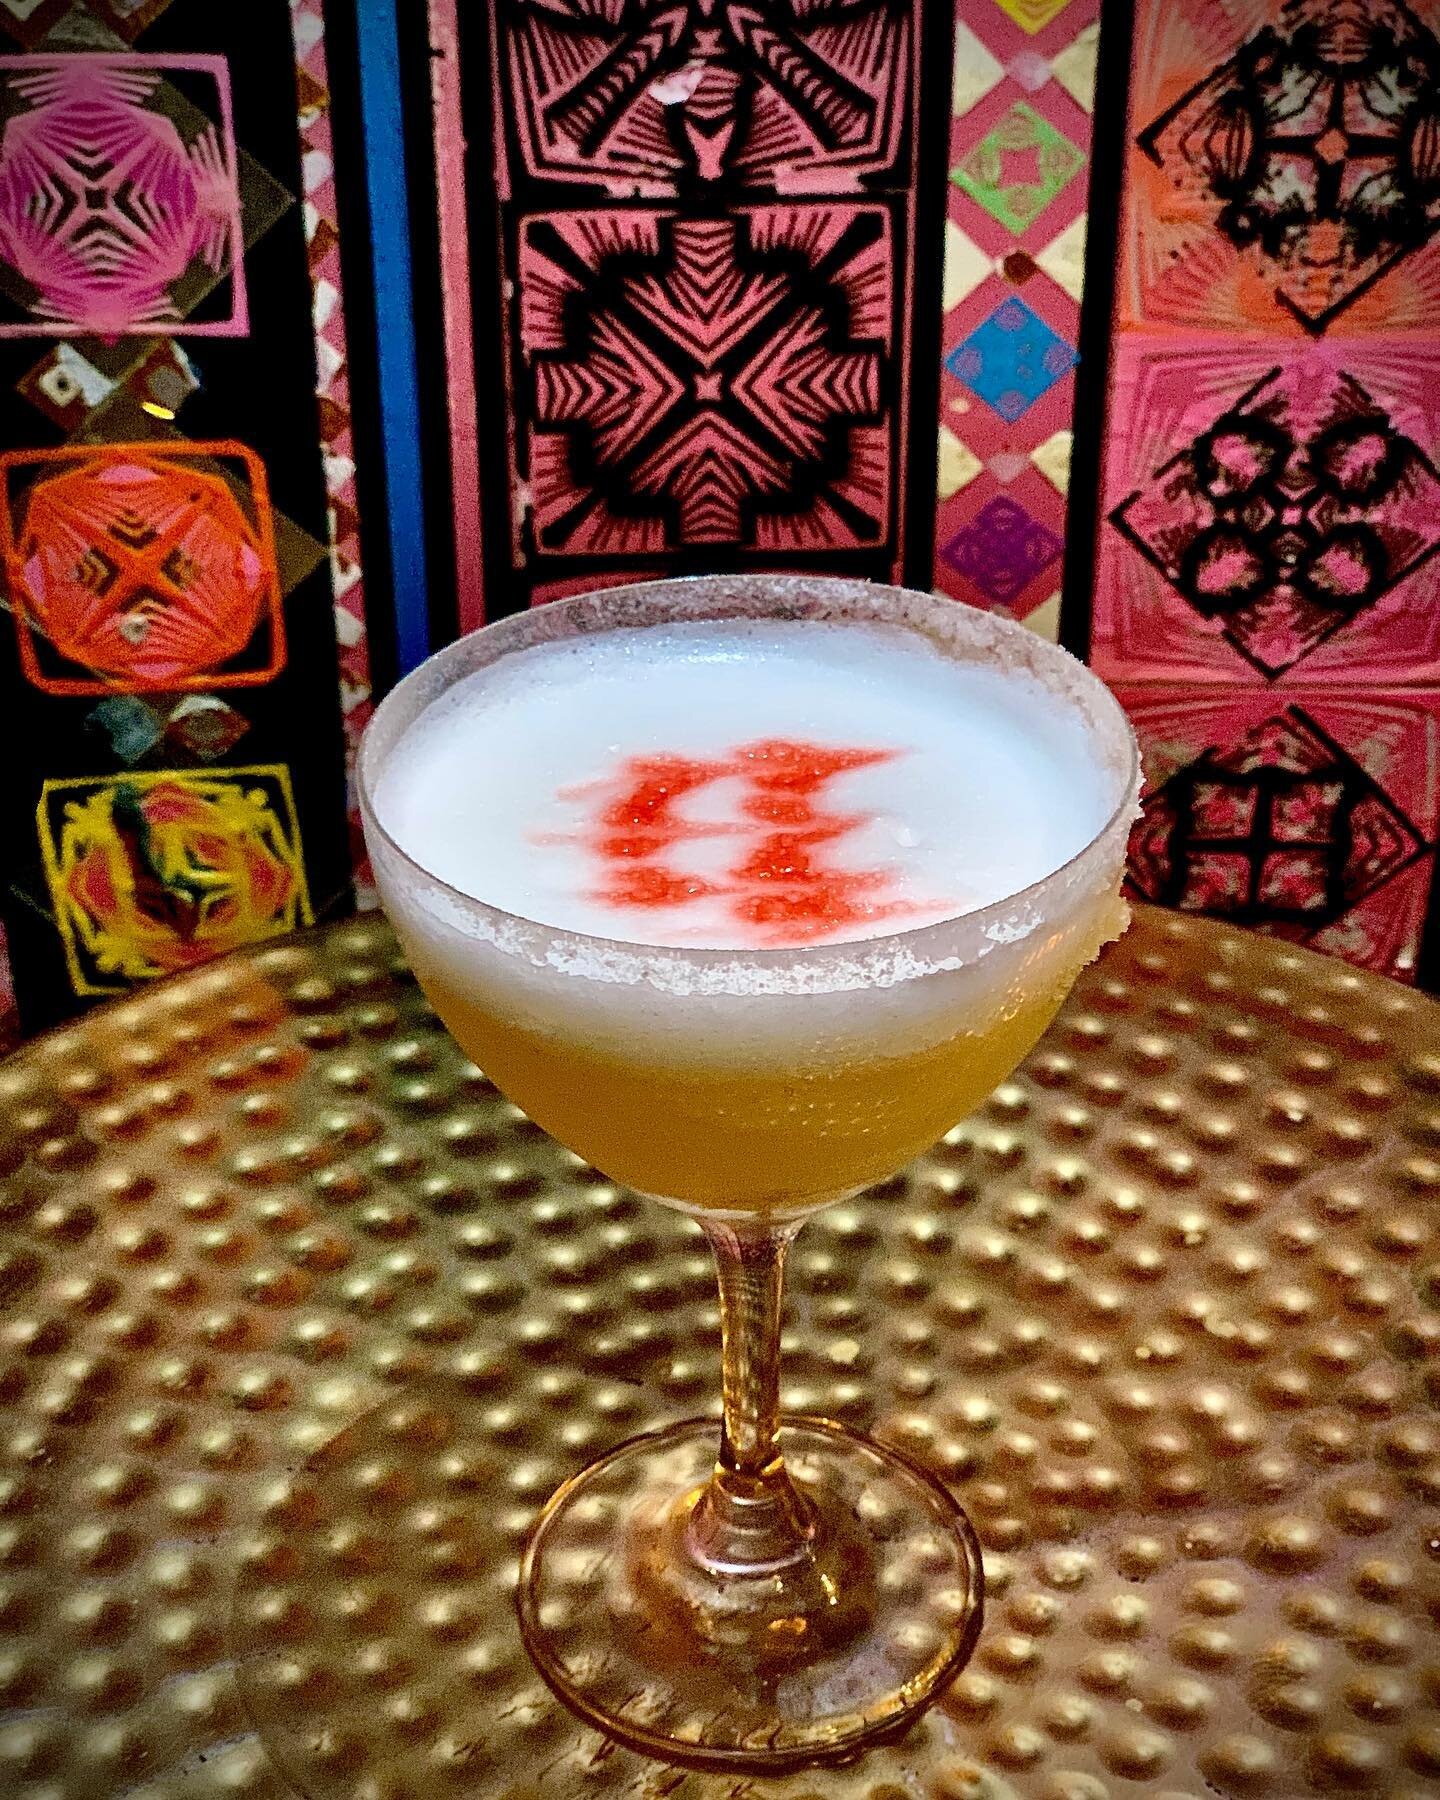 Margarita Hibernacion rolling out on our fall menu: Casamigos Reposado, Del Maguey Chichicapa, egg white, agave and lime with a salt rim.